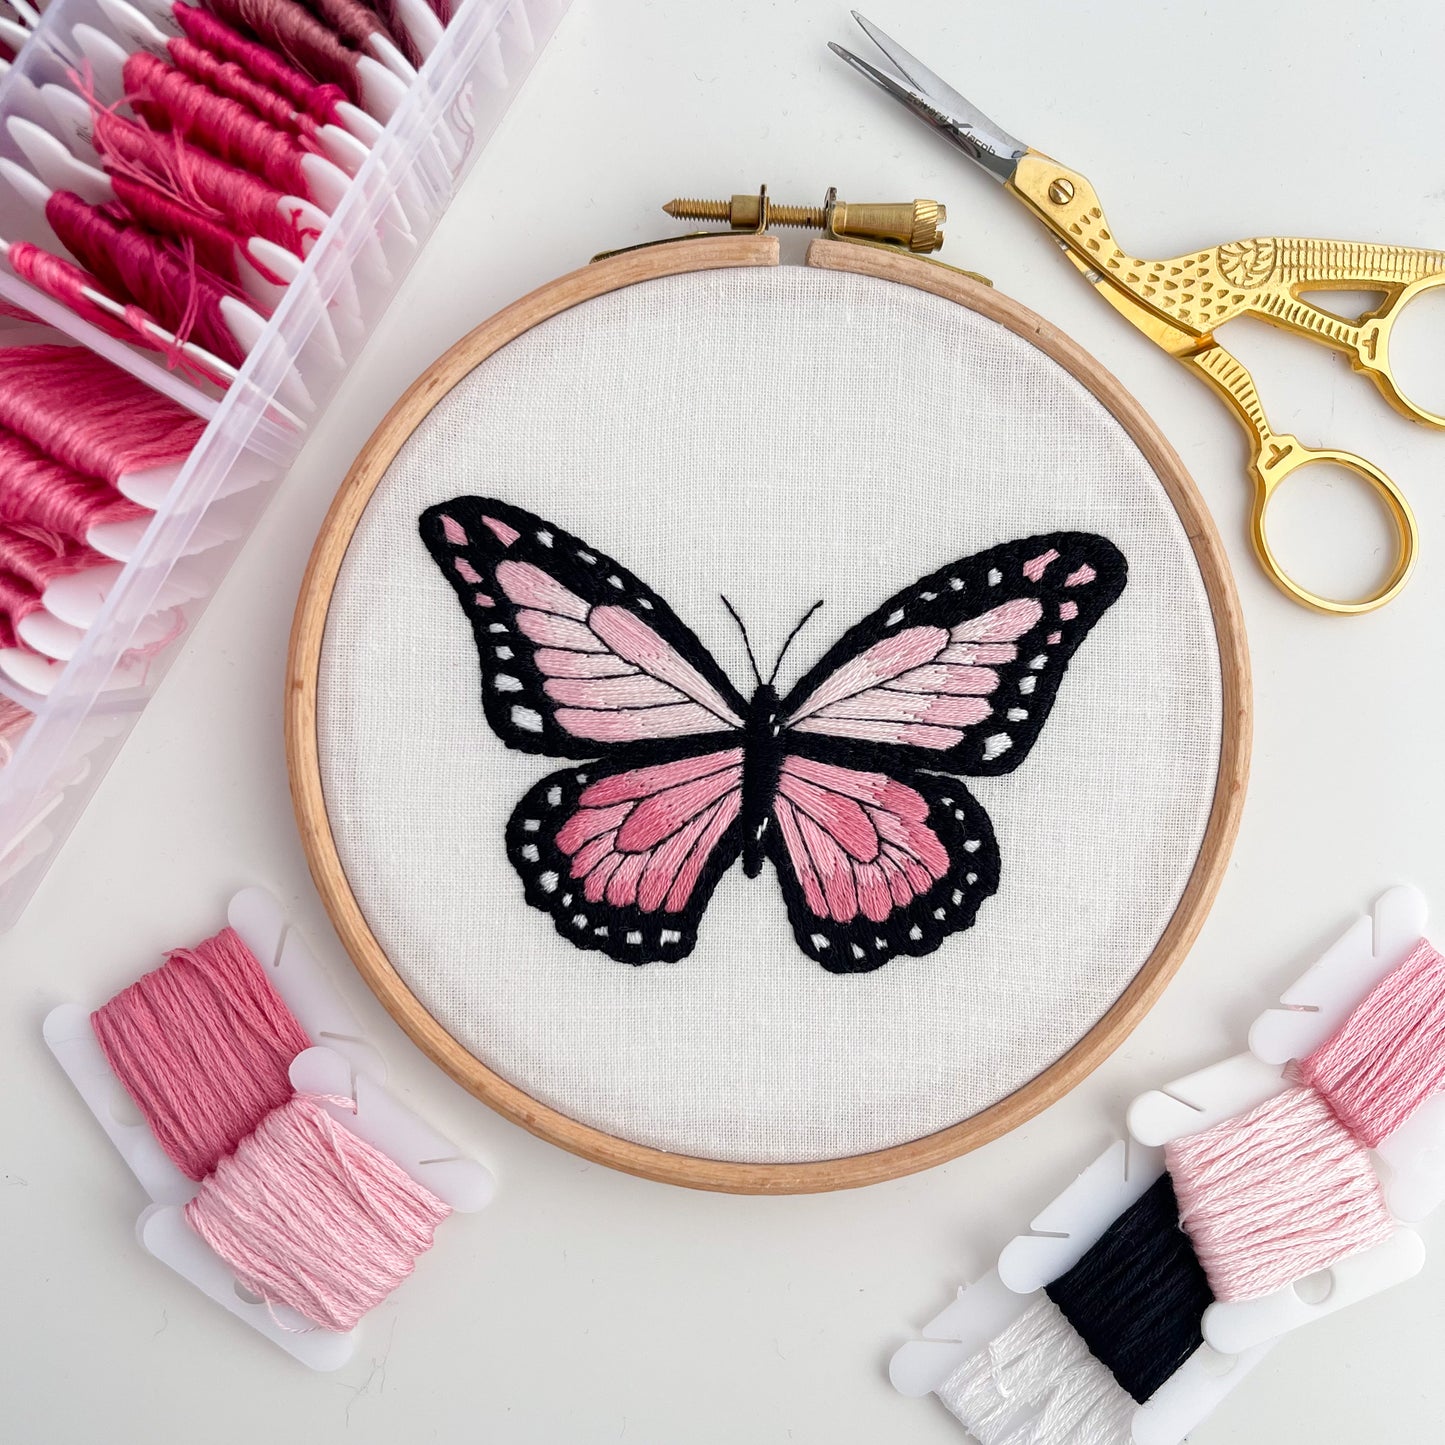 Butterfly Hand Embroidery PDF Pattern